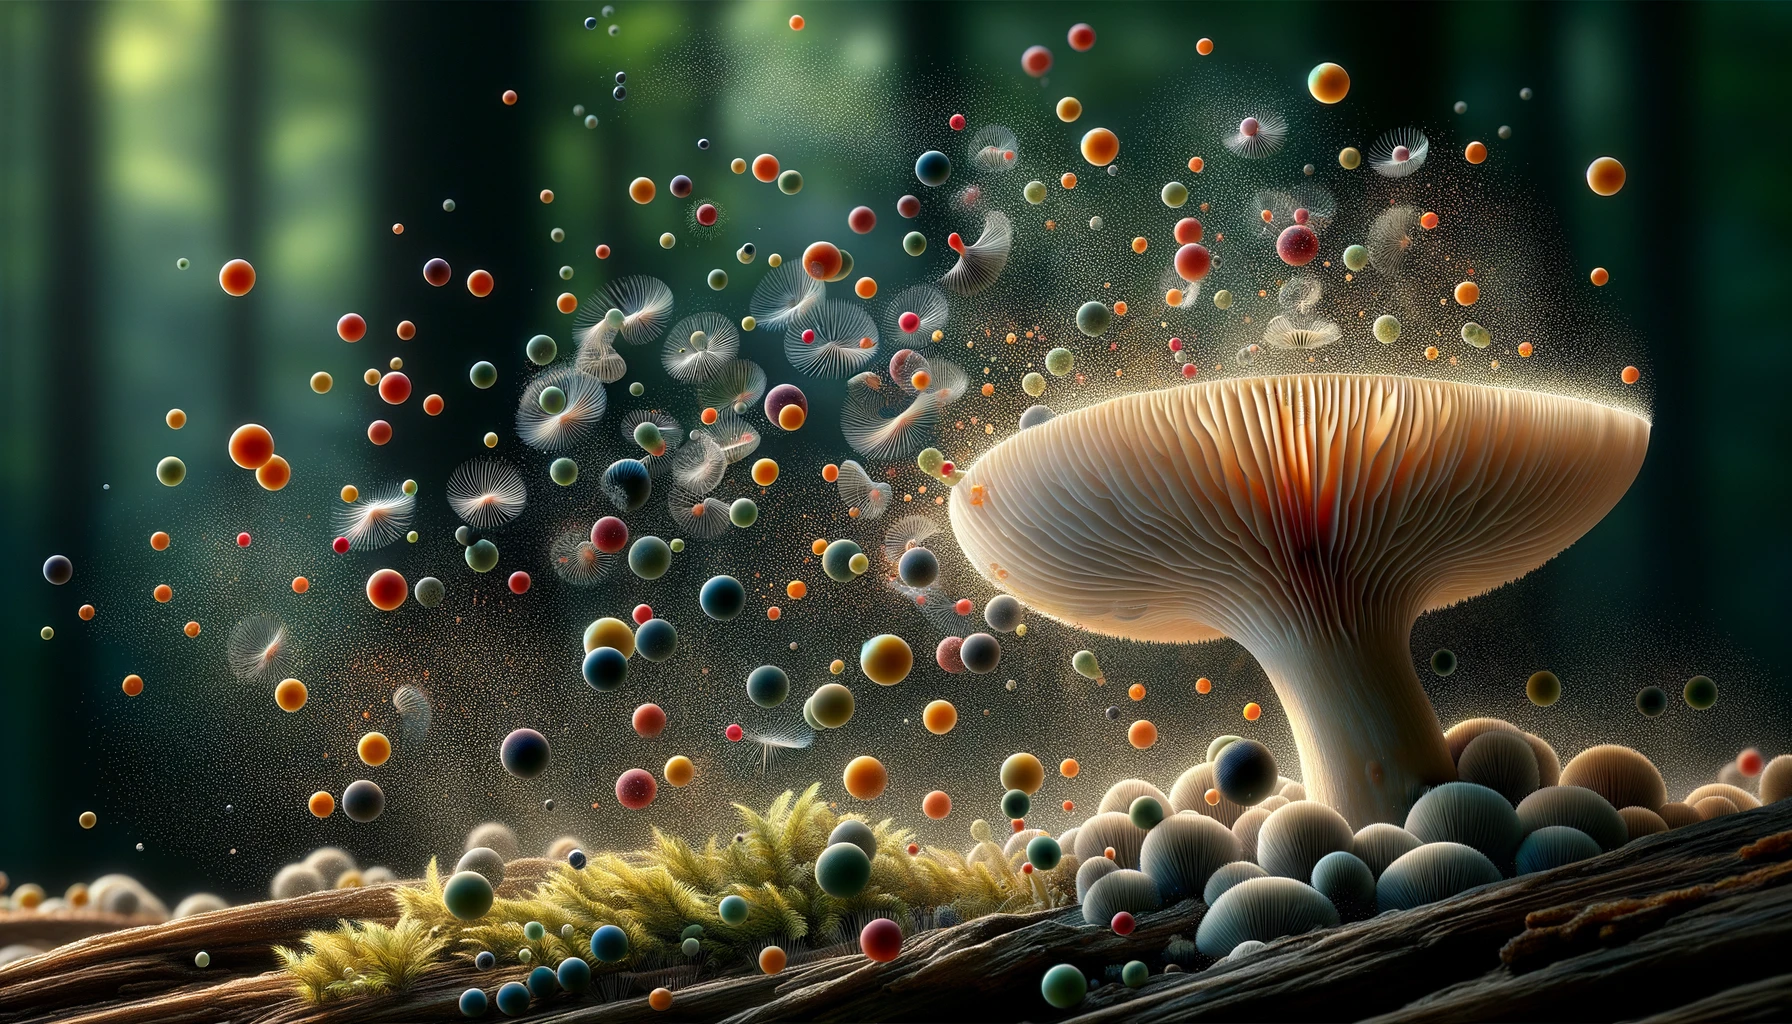 A close-up, detailed illustration of mushroom spores dispersing from the gills of a mushroom, showcasing a variety of spore colors against a natural, forest background. The image should capture the moment of dispersal, with spores floating away in the air, to visually represent the microscopic beauty and complexity of mushroom reproduction. Include a single mushroom in the center with visible gills releasing tiny, colorful spores into the surrounding forest atmosphere, highlighting the magical and intricate process of spore dispersal. The style should be realistic yet with an artistic touch to emphasize the spores' details and the natural environment.